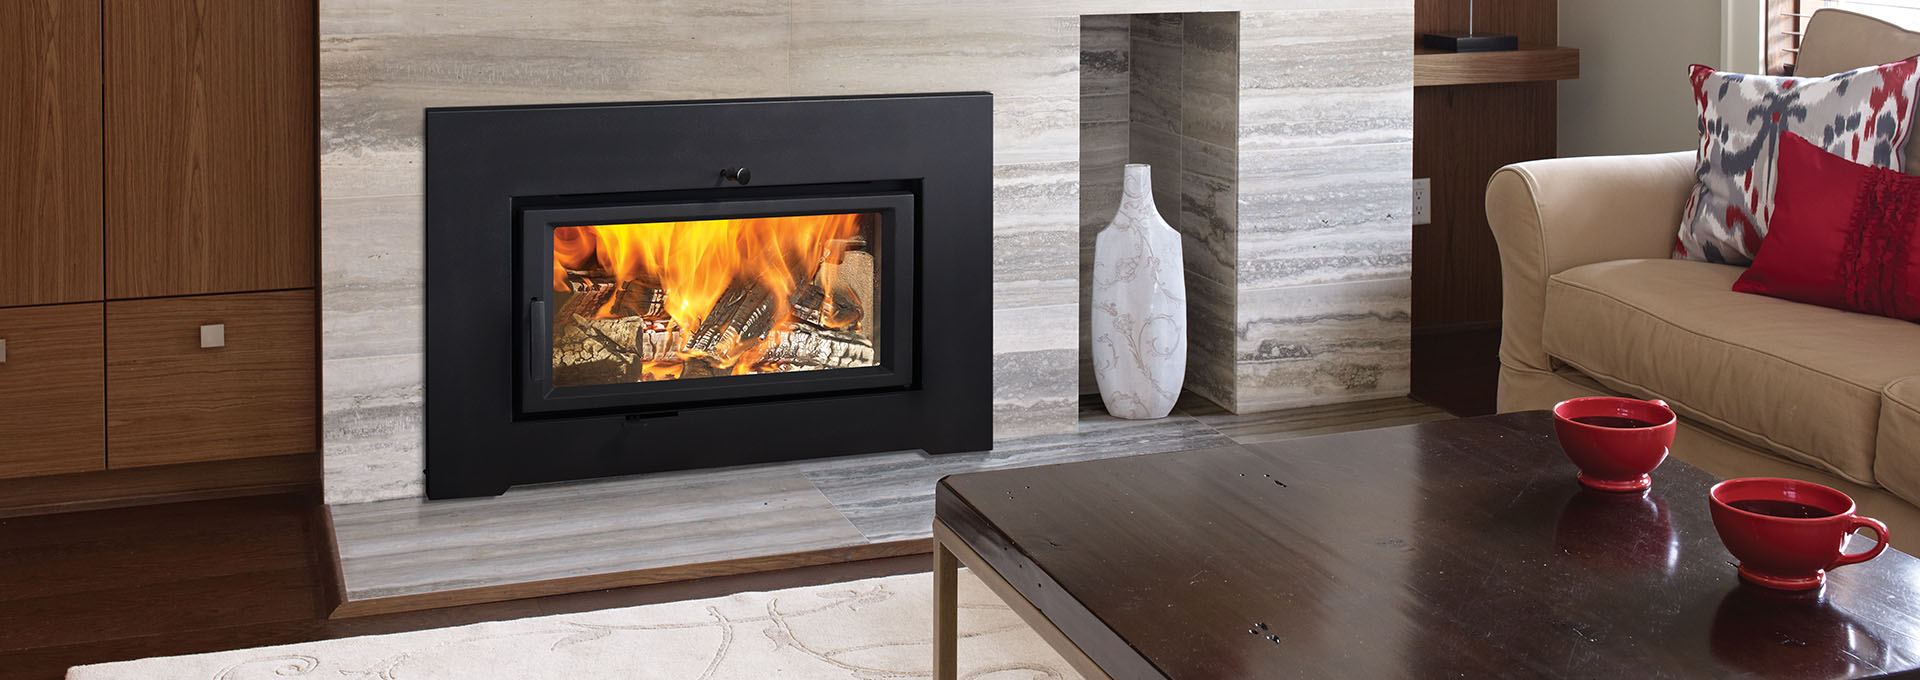 Electric Gas Fireplace Insert Unique Wood Inserts Epa Certified